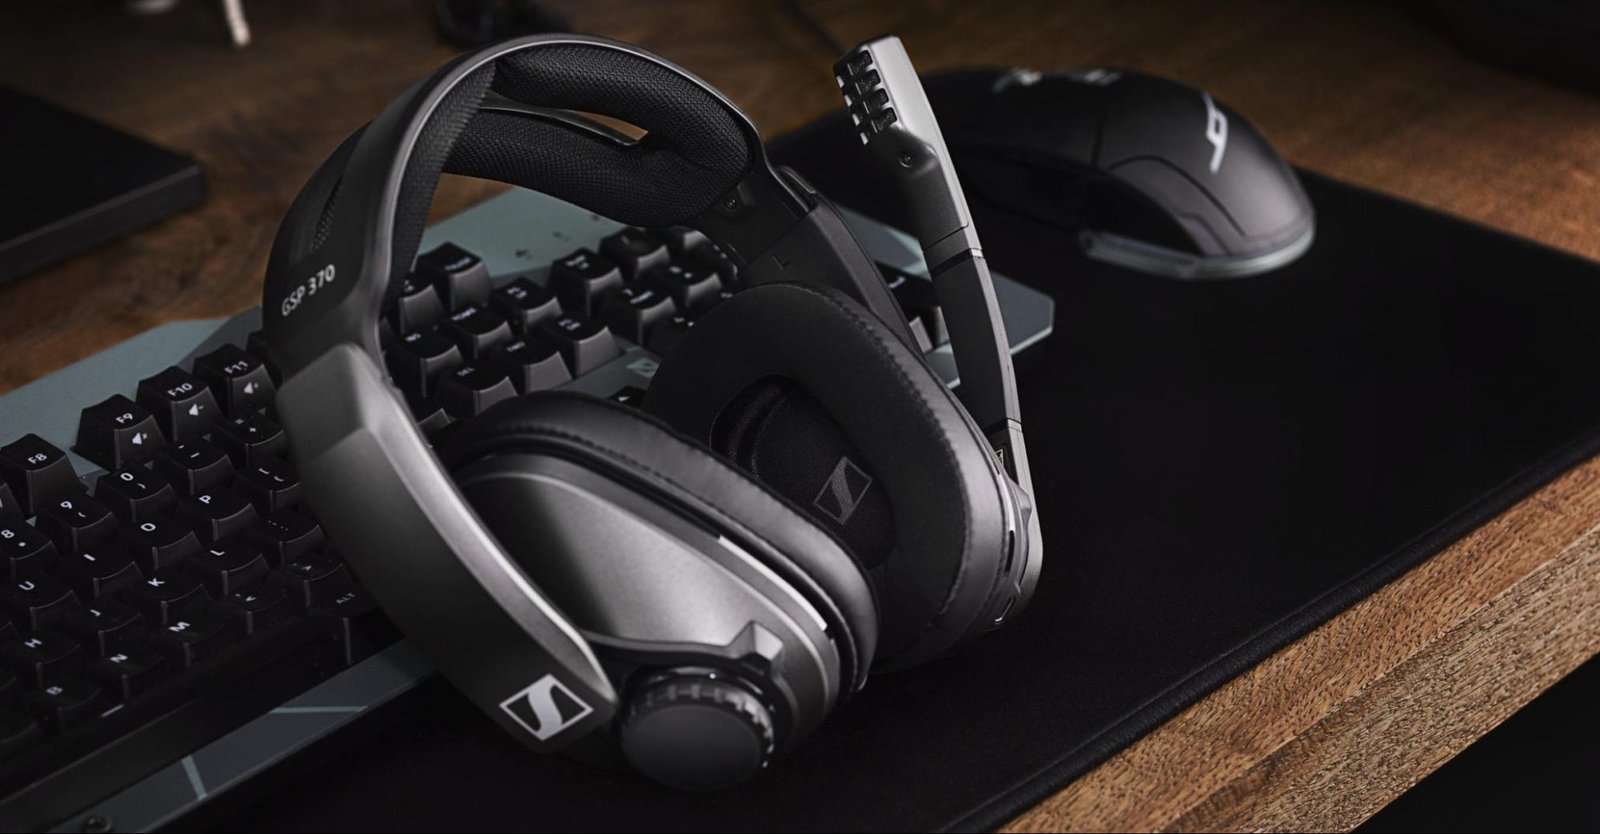 Sennheiser headphones with keyboard, mouse, and desk mat